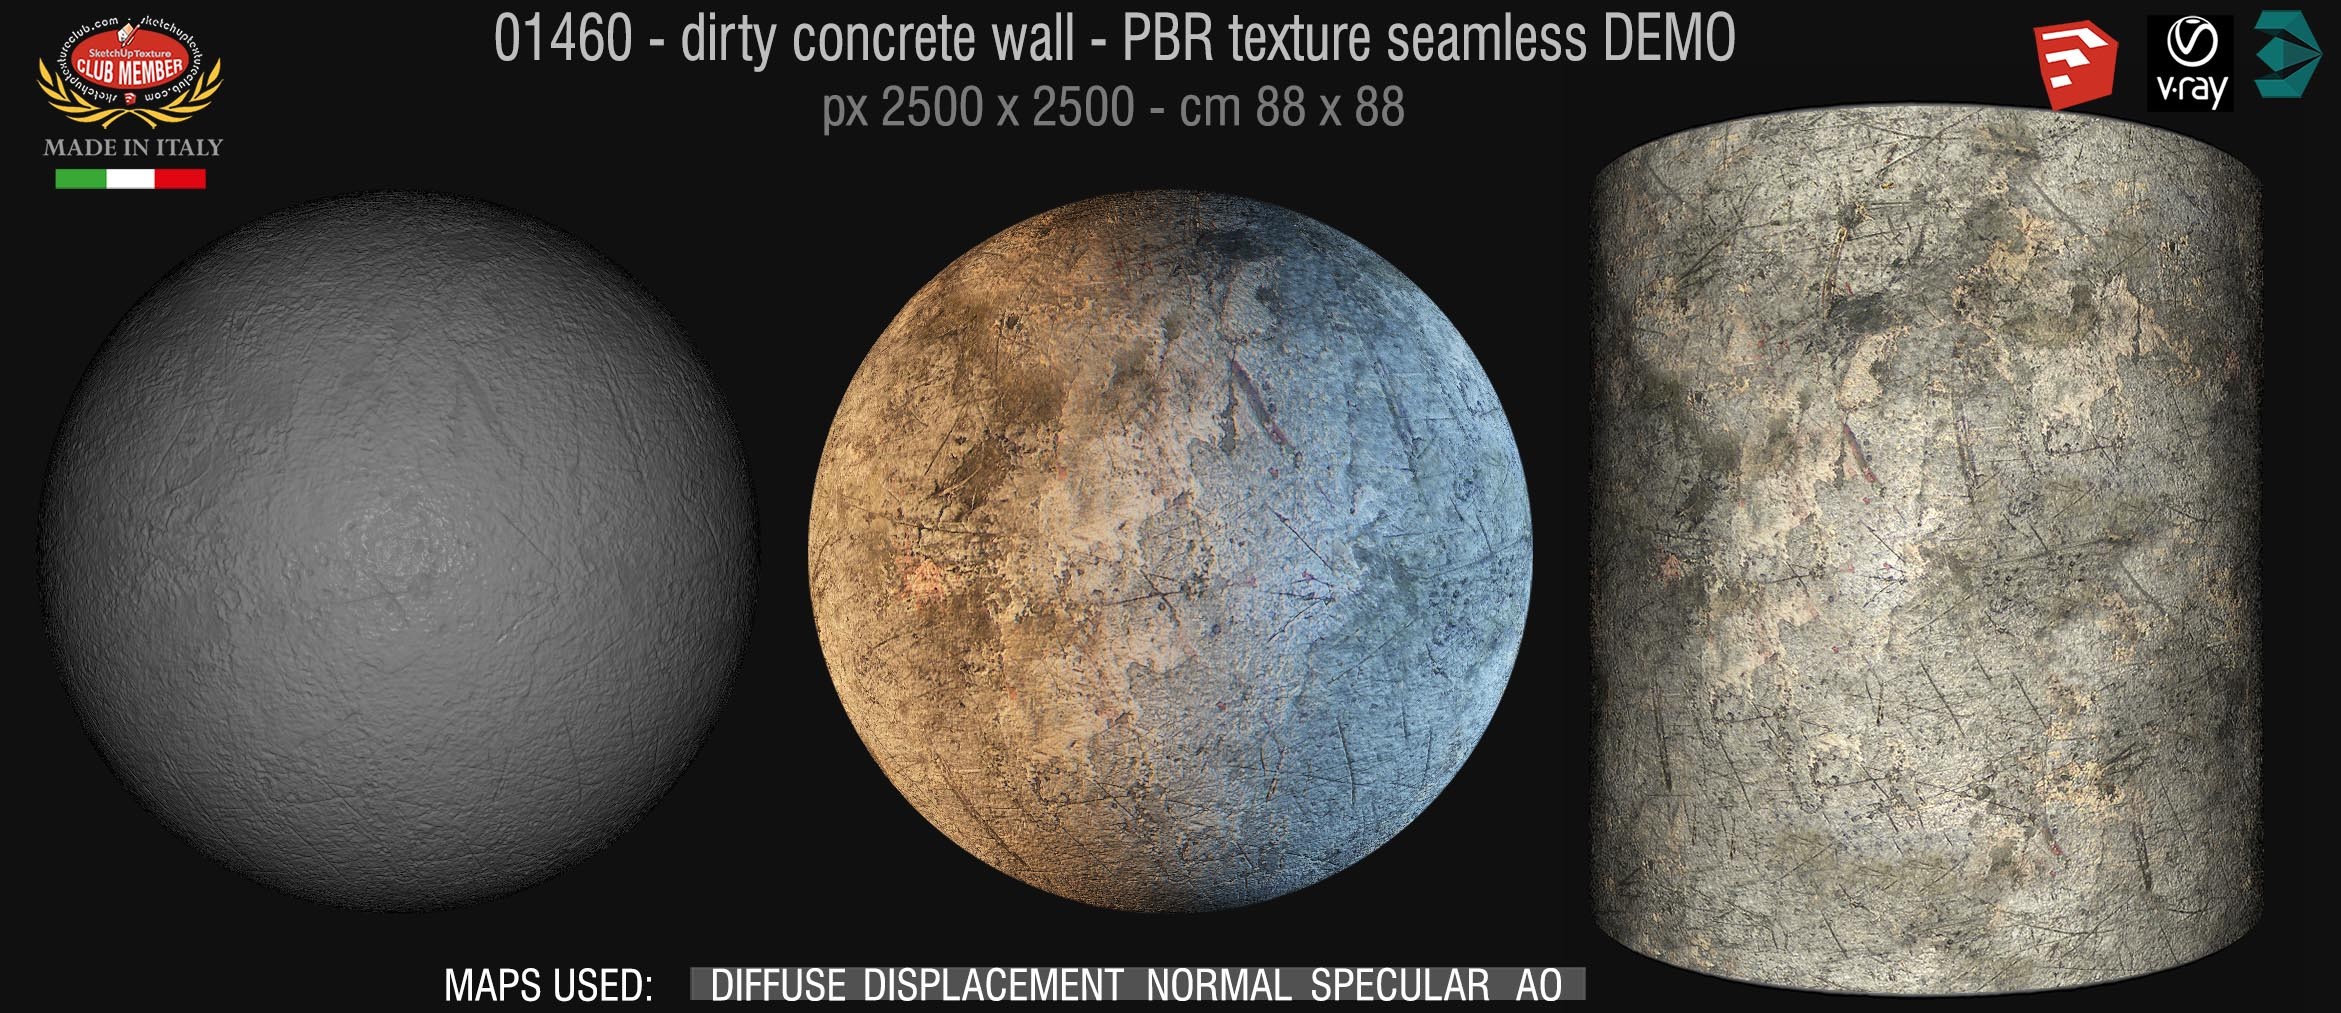 01460 Concrete bare dirty wall PBR texture seamless DEMO